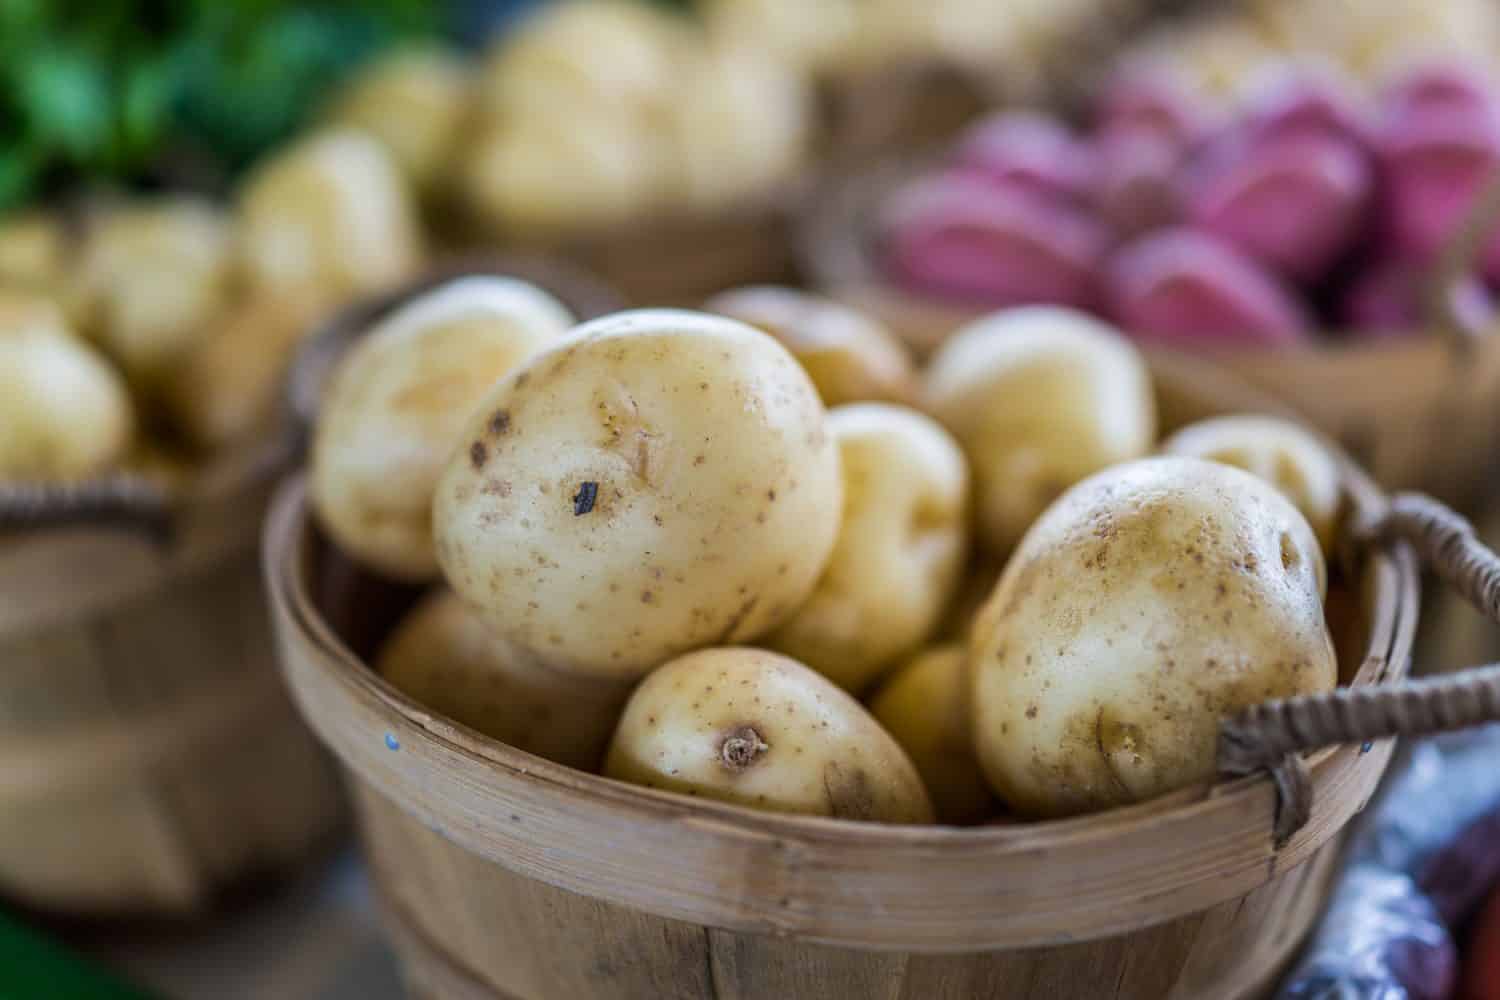 Macro closeup of white golden potatoes in a basket in farmers market showing detail and texture